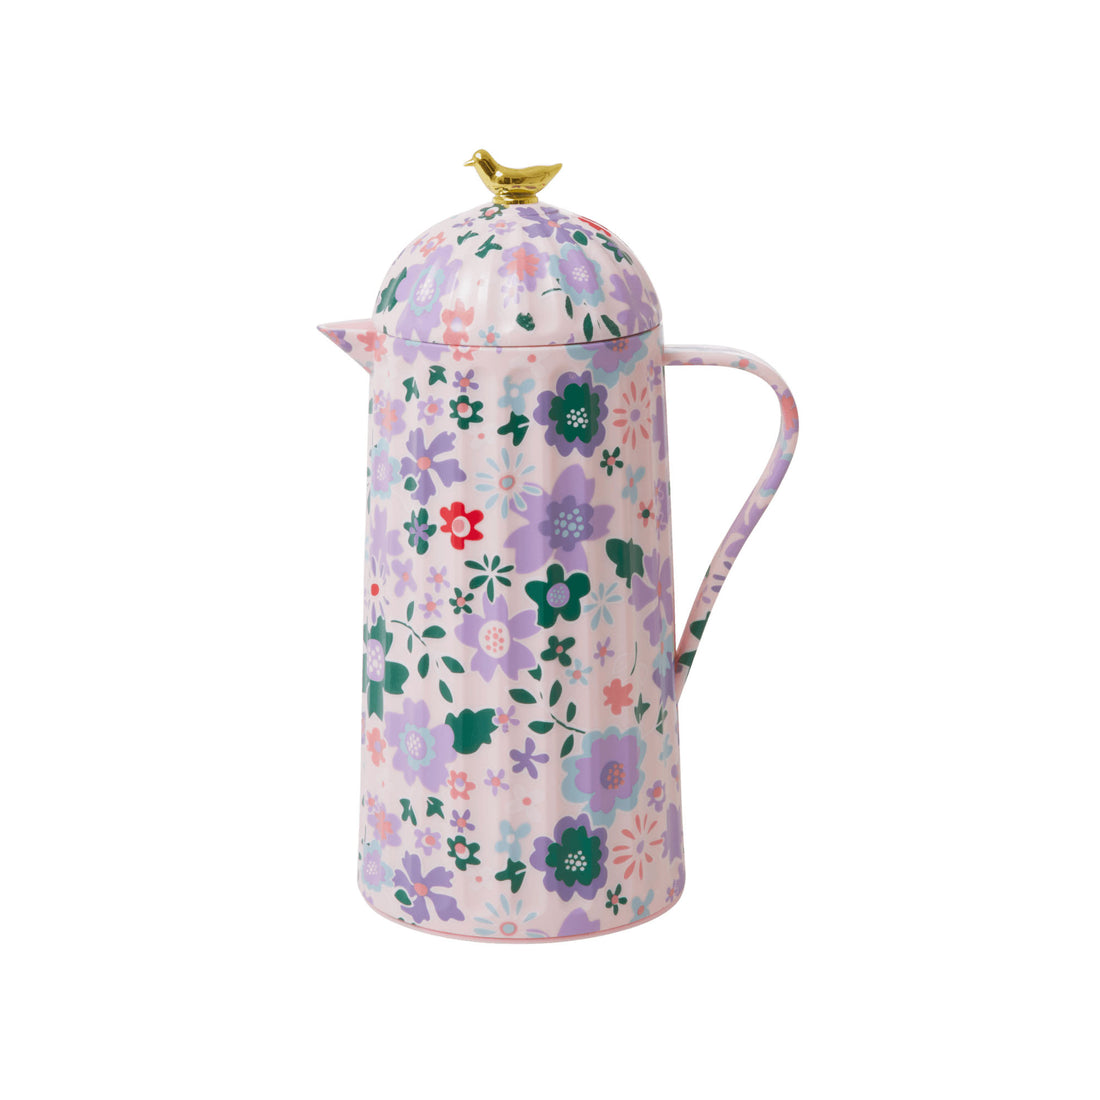 rice-dk-thermo-with-gold-bird-lid-with-pink-fall-floral-print-rice-thermo-bipi-01